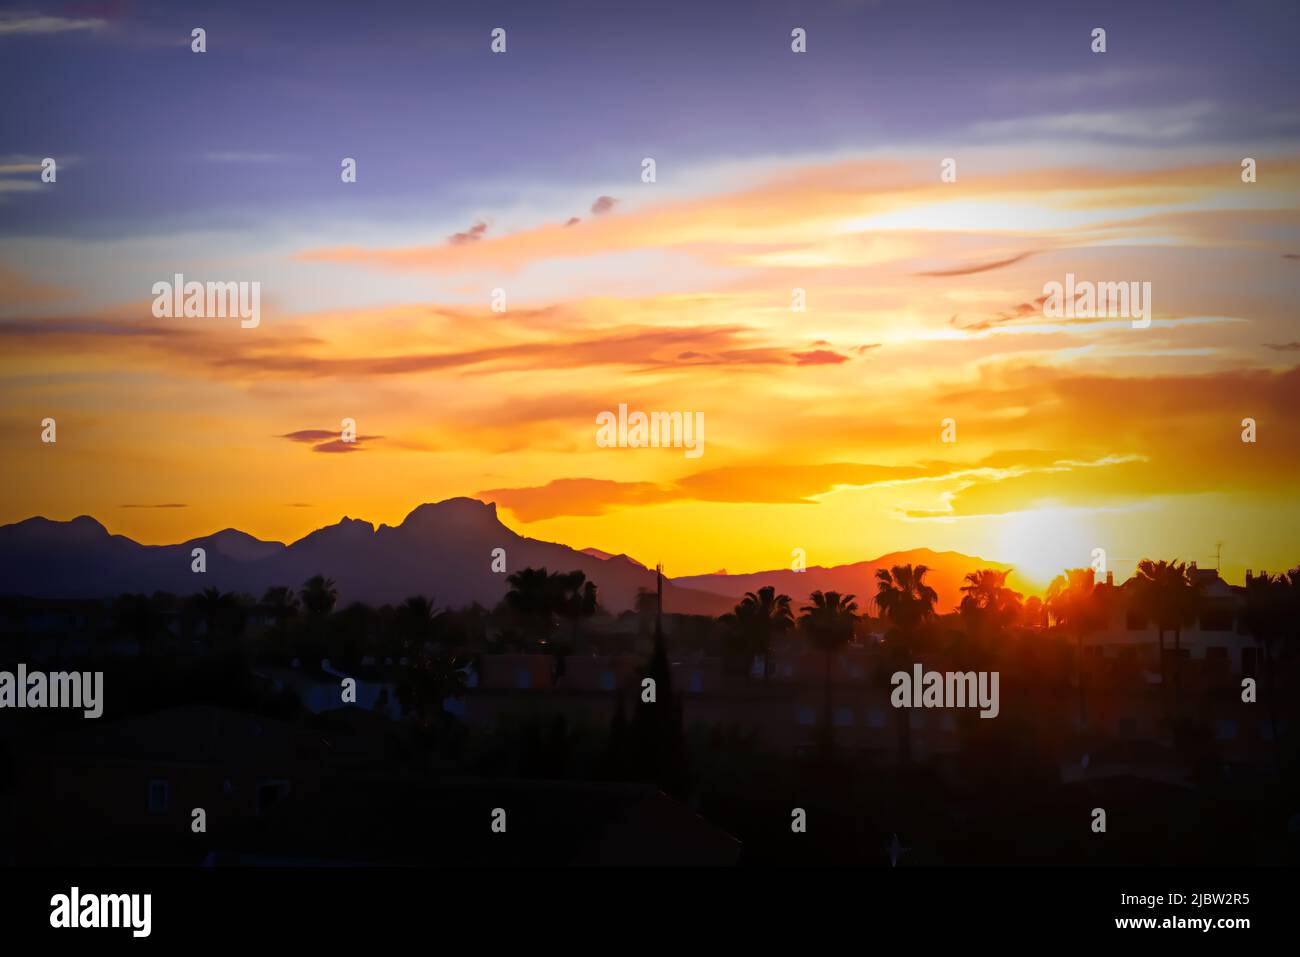 Denia Spain sunset with palm trees bright colourful sky and view to mountains Stock Photo